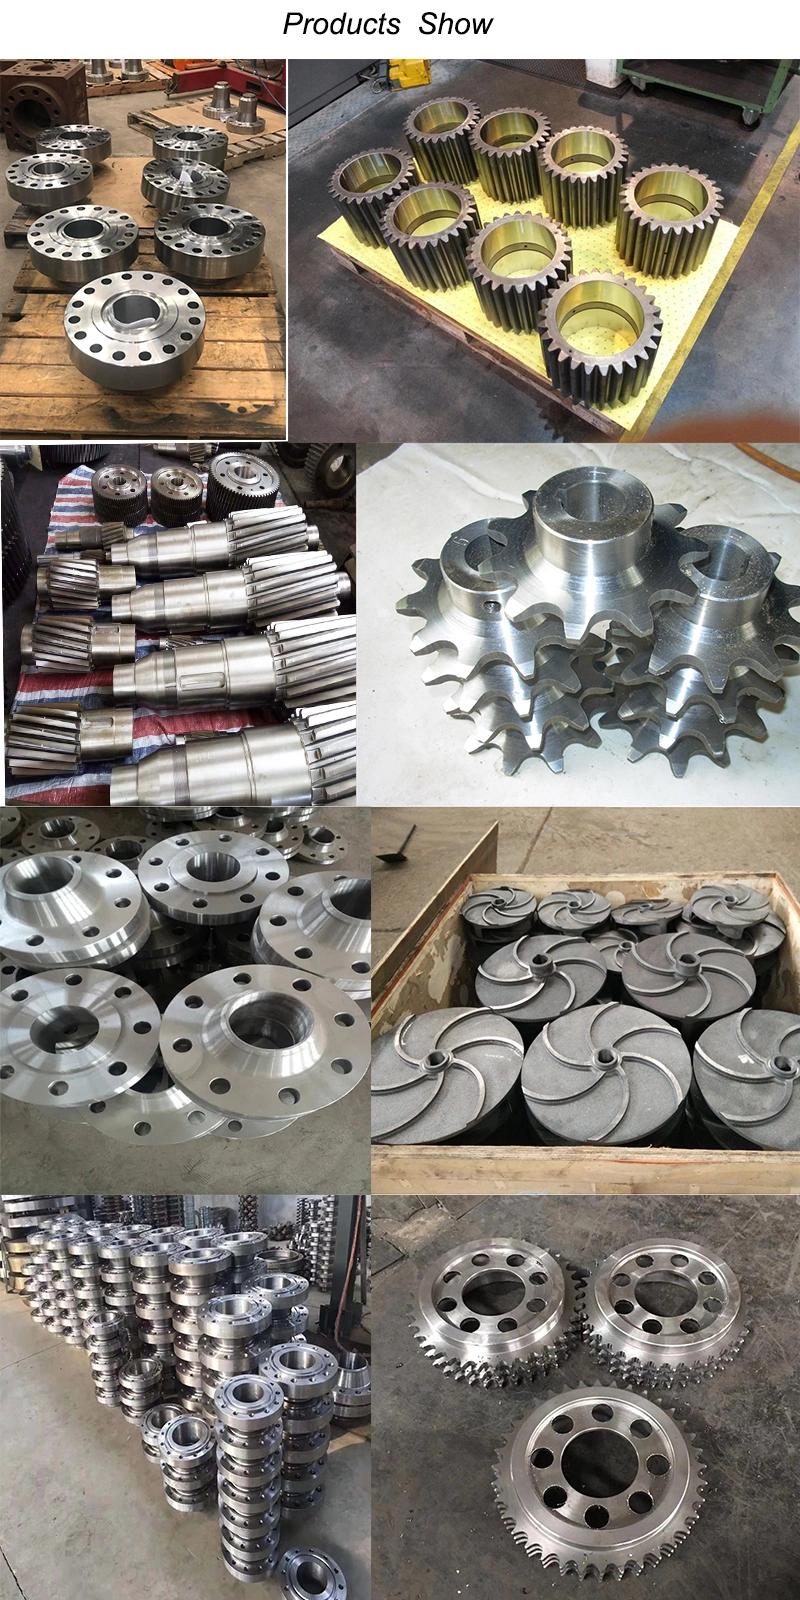 Stainless Steel/Duct V Belt Pully/Falt Pully/Taper Bush Pully/Split V Pully/Step Pully/Single Pully/Double Pully/Idle Pully Die/Investment/Sand Casting Parts